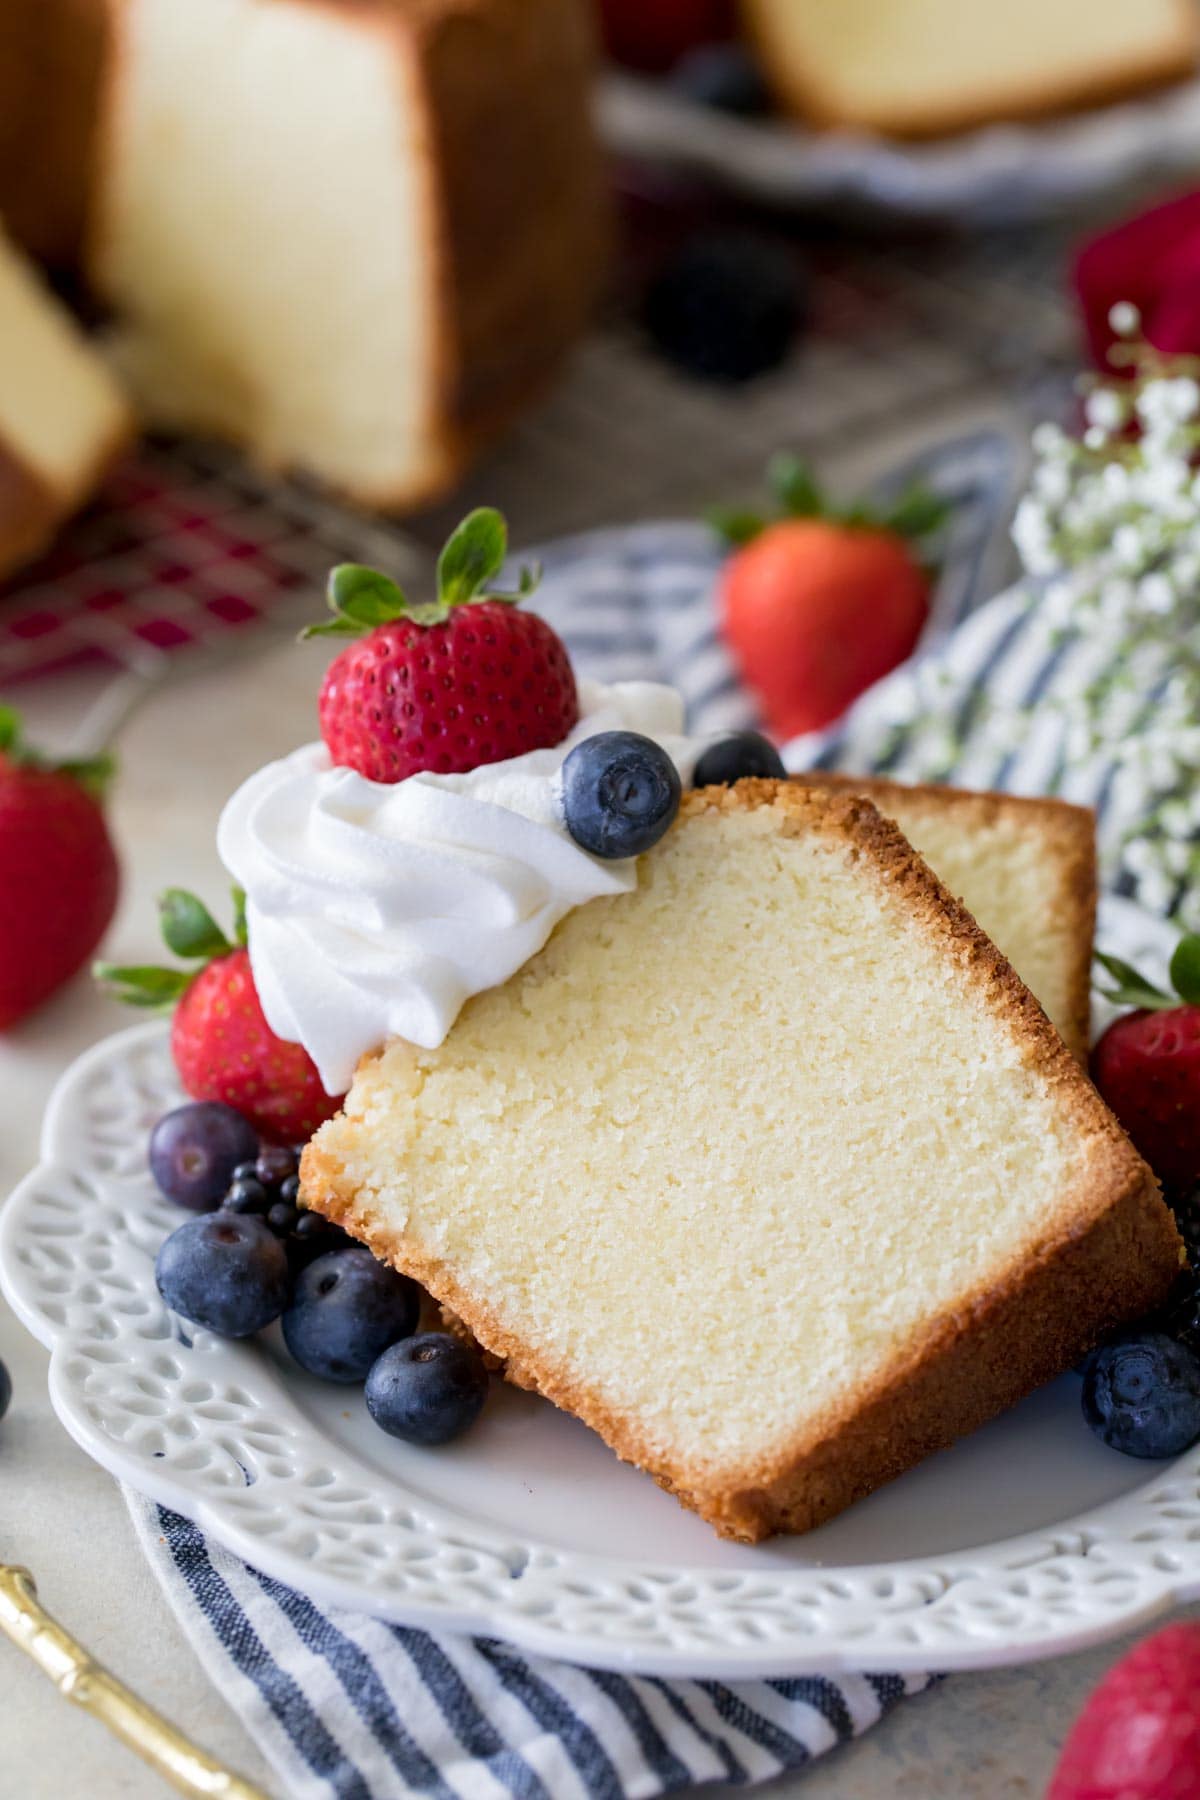 Two slices of pound cake topped with whipped cream and berries